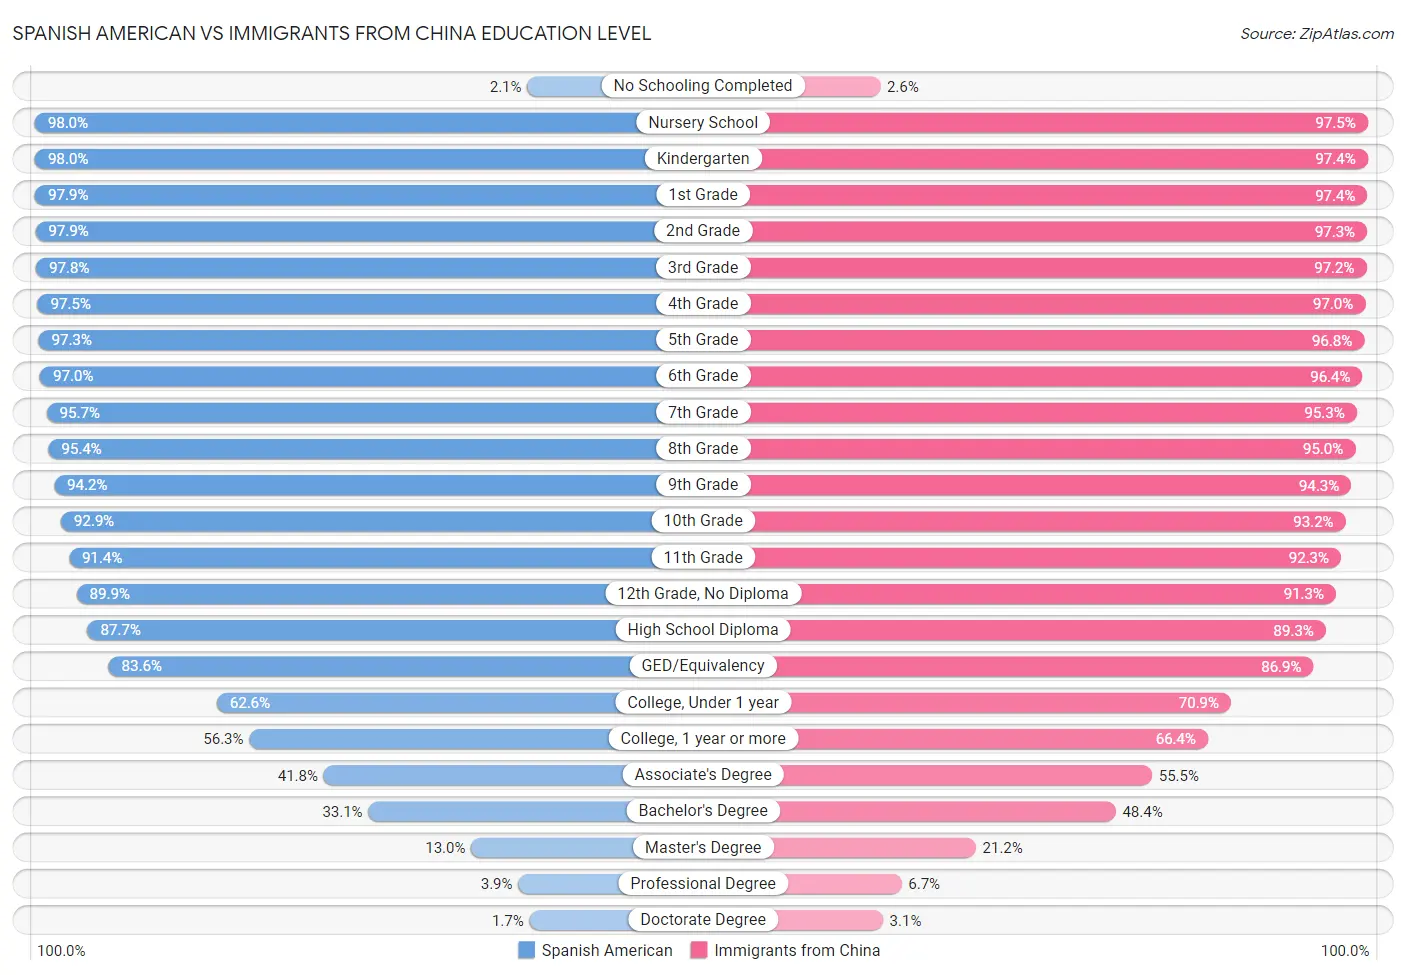 Spanish American vs Immigrants from China Education Level